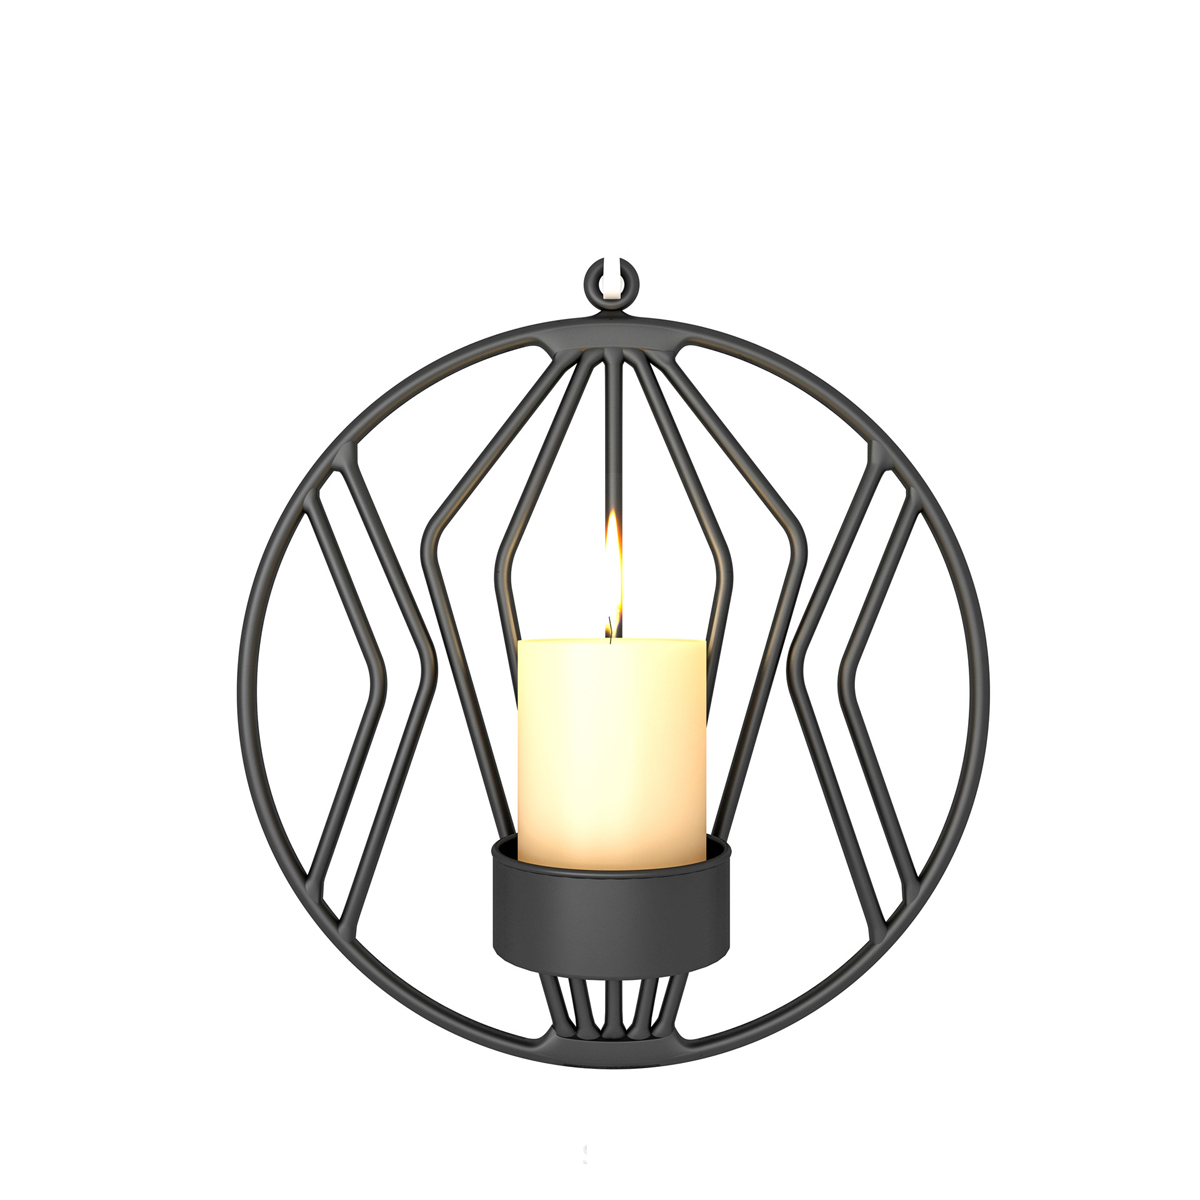 3D-Geometric-Candlestick-Iron-Wall-Candle-Holder-Sconce-Warm-Home-Party-Decor-1727945-8